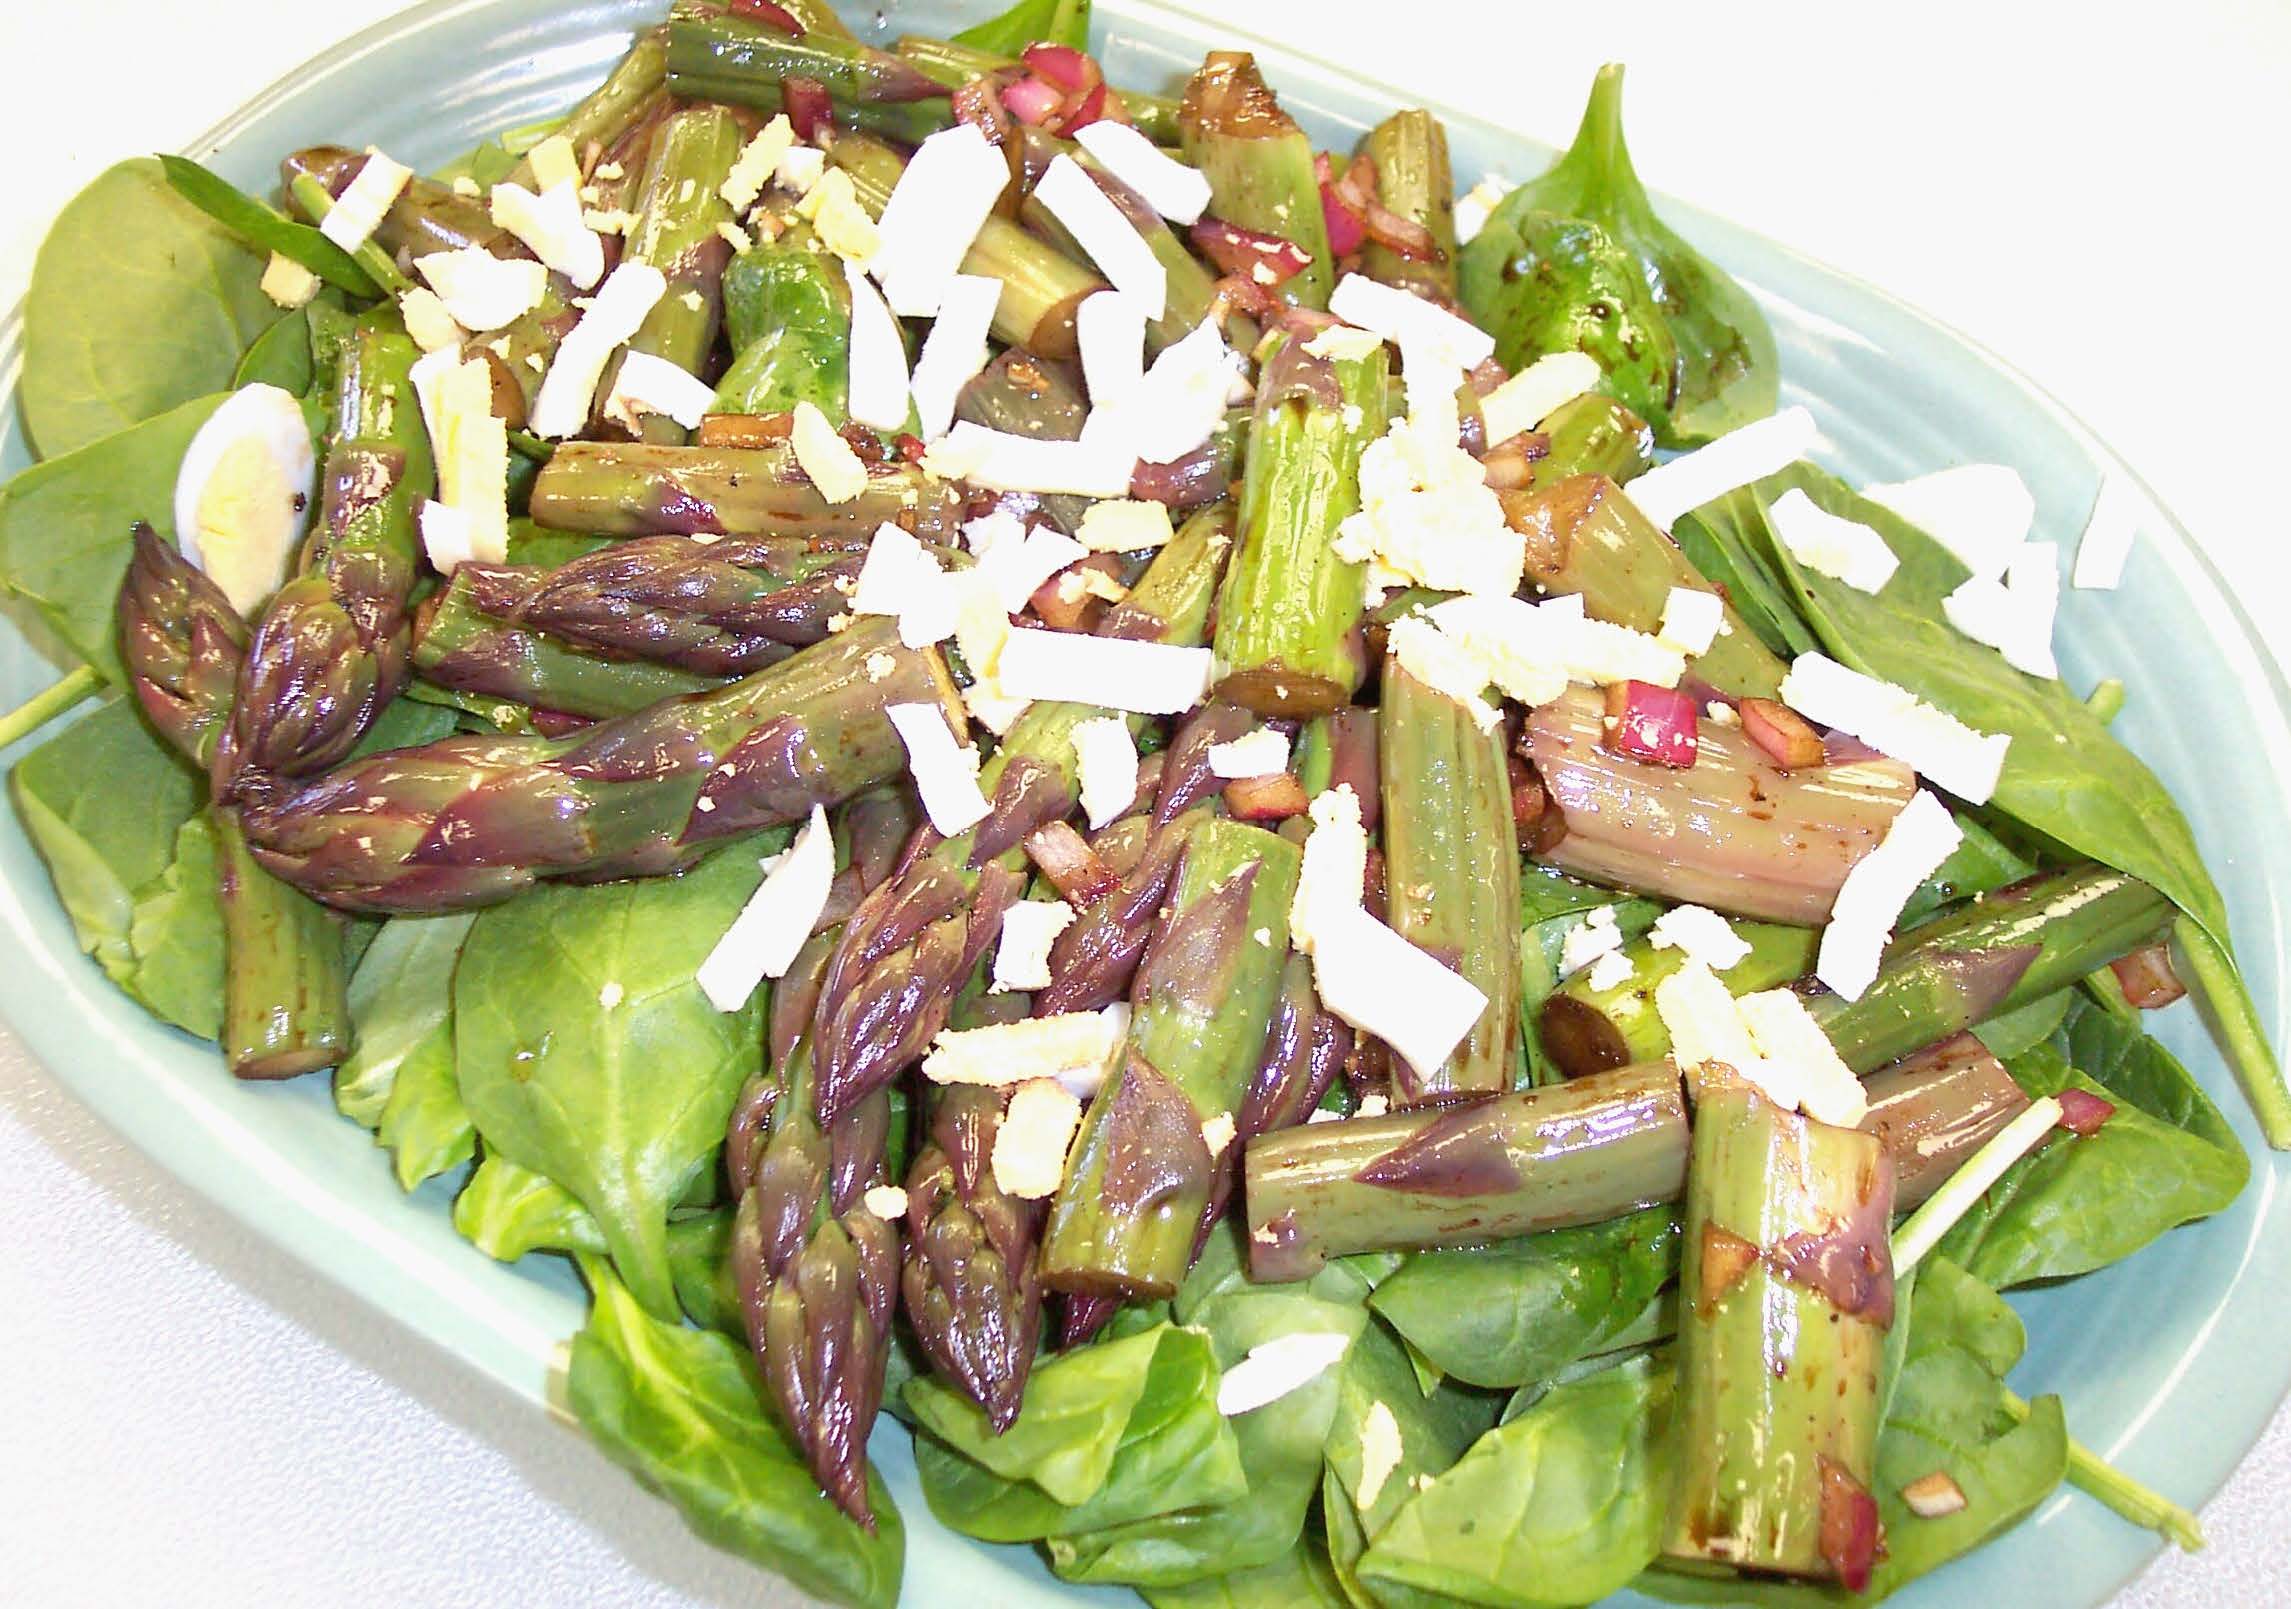 A bowl of wilted spinach and asparagus salad on a white background.